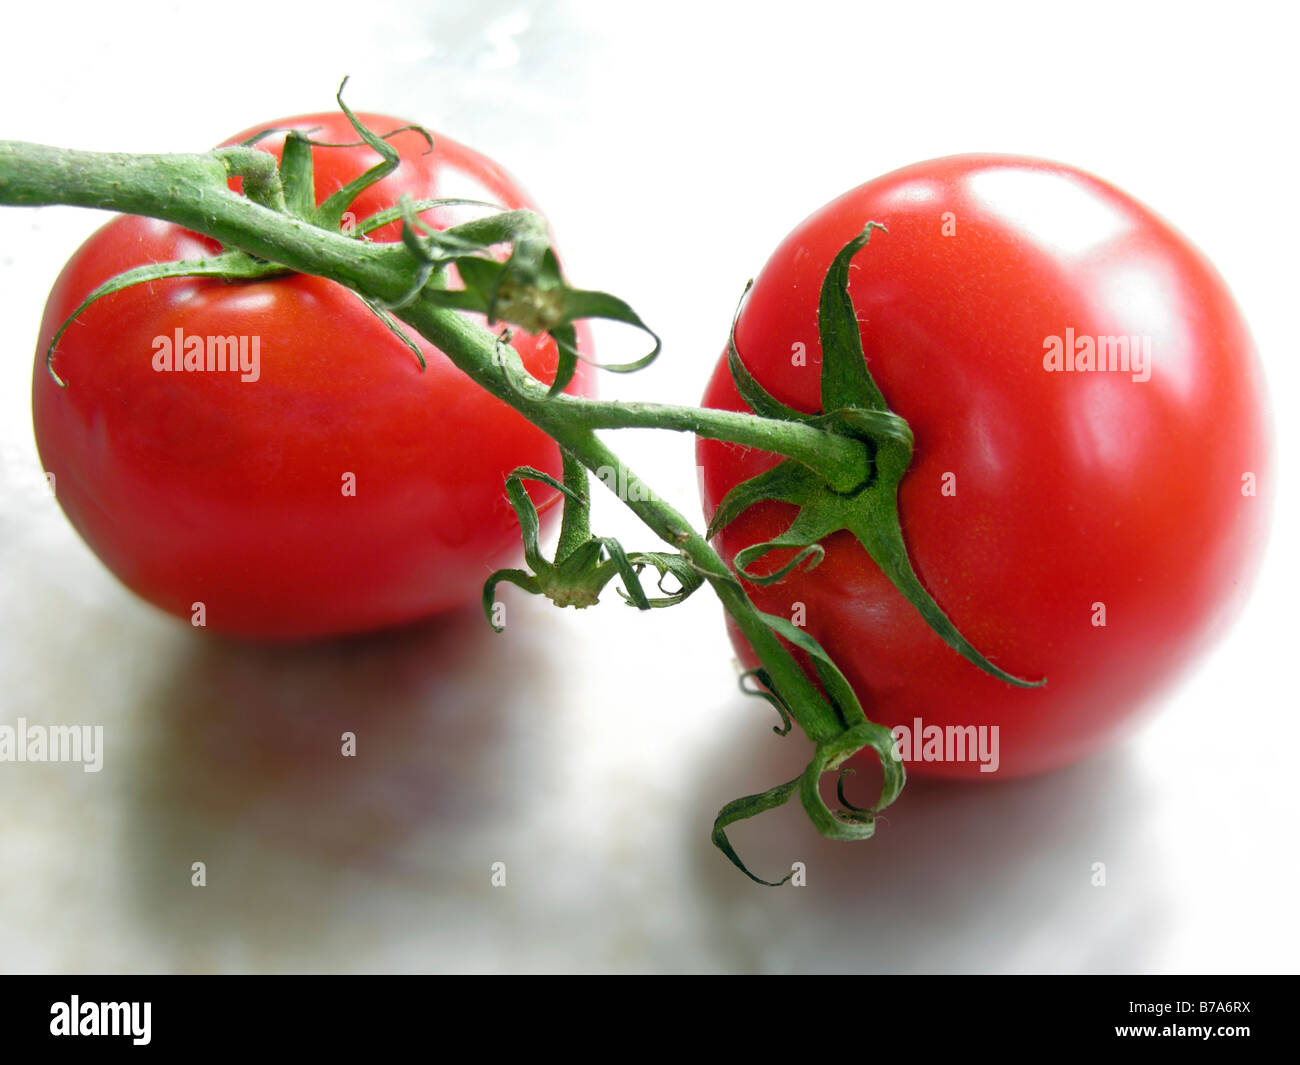 Tomatoes on metal plate Stock Photo